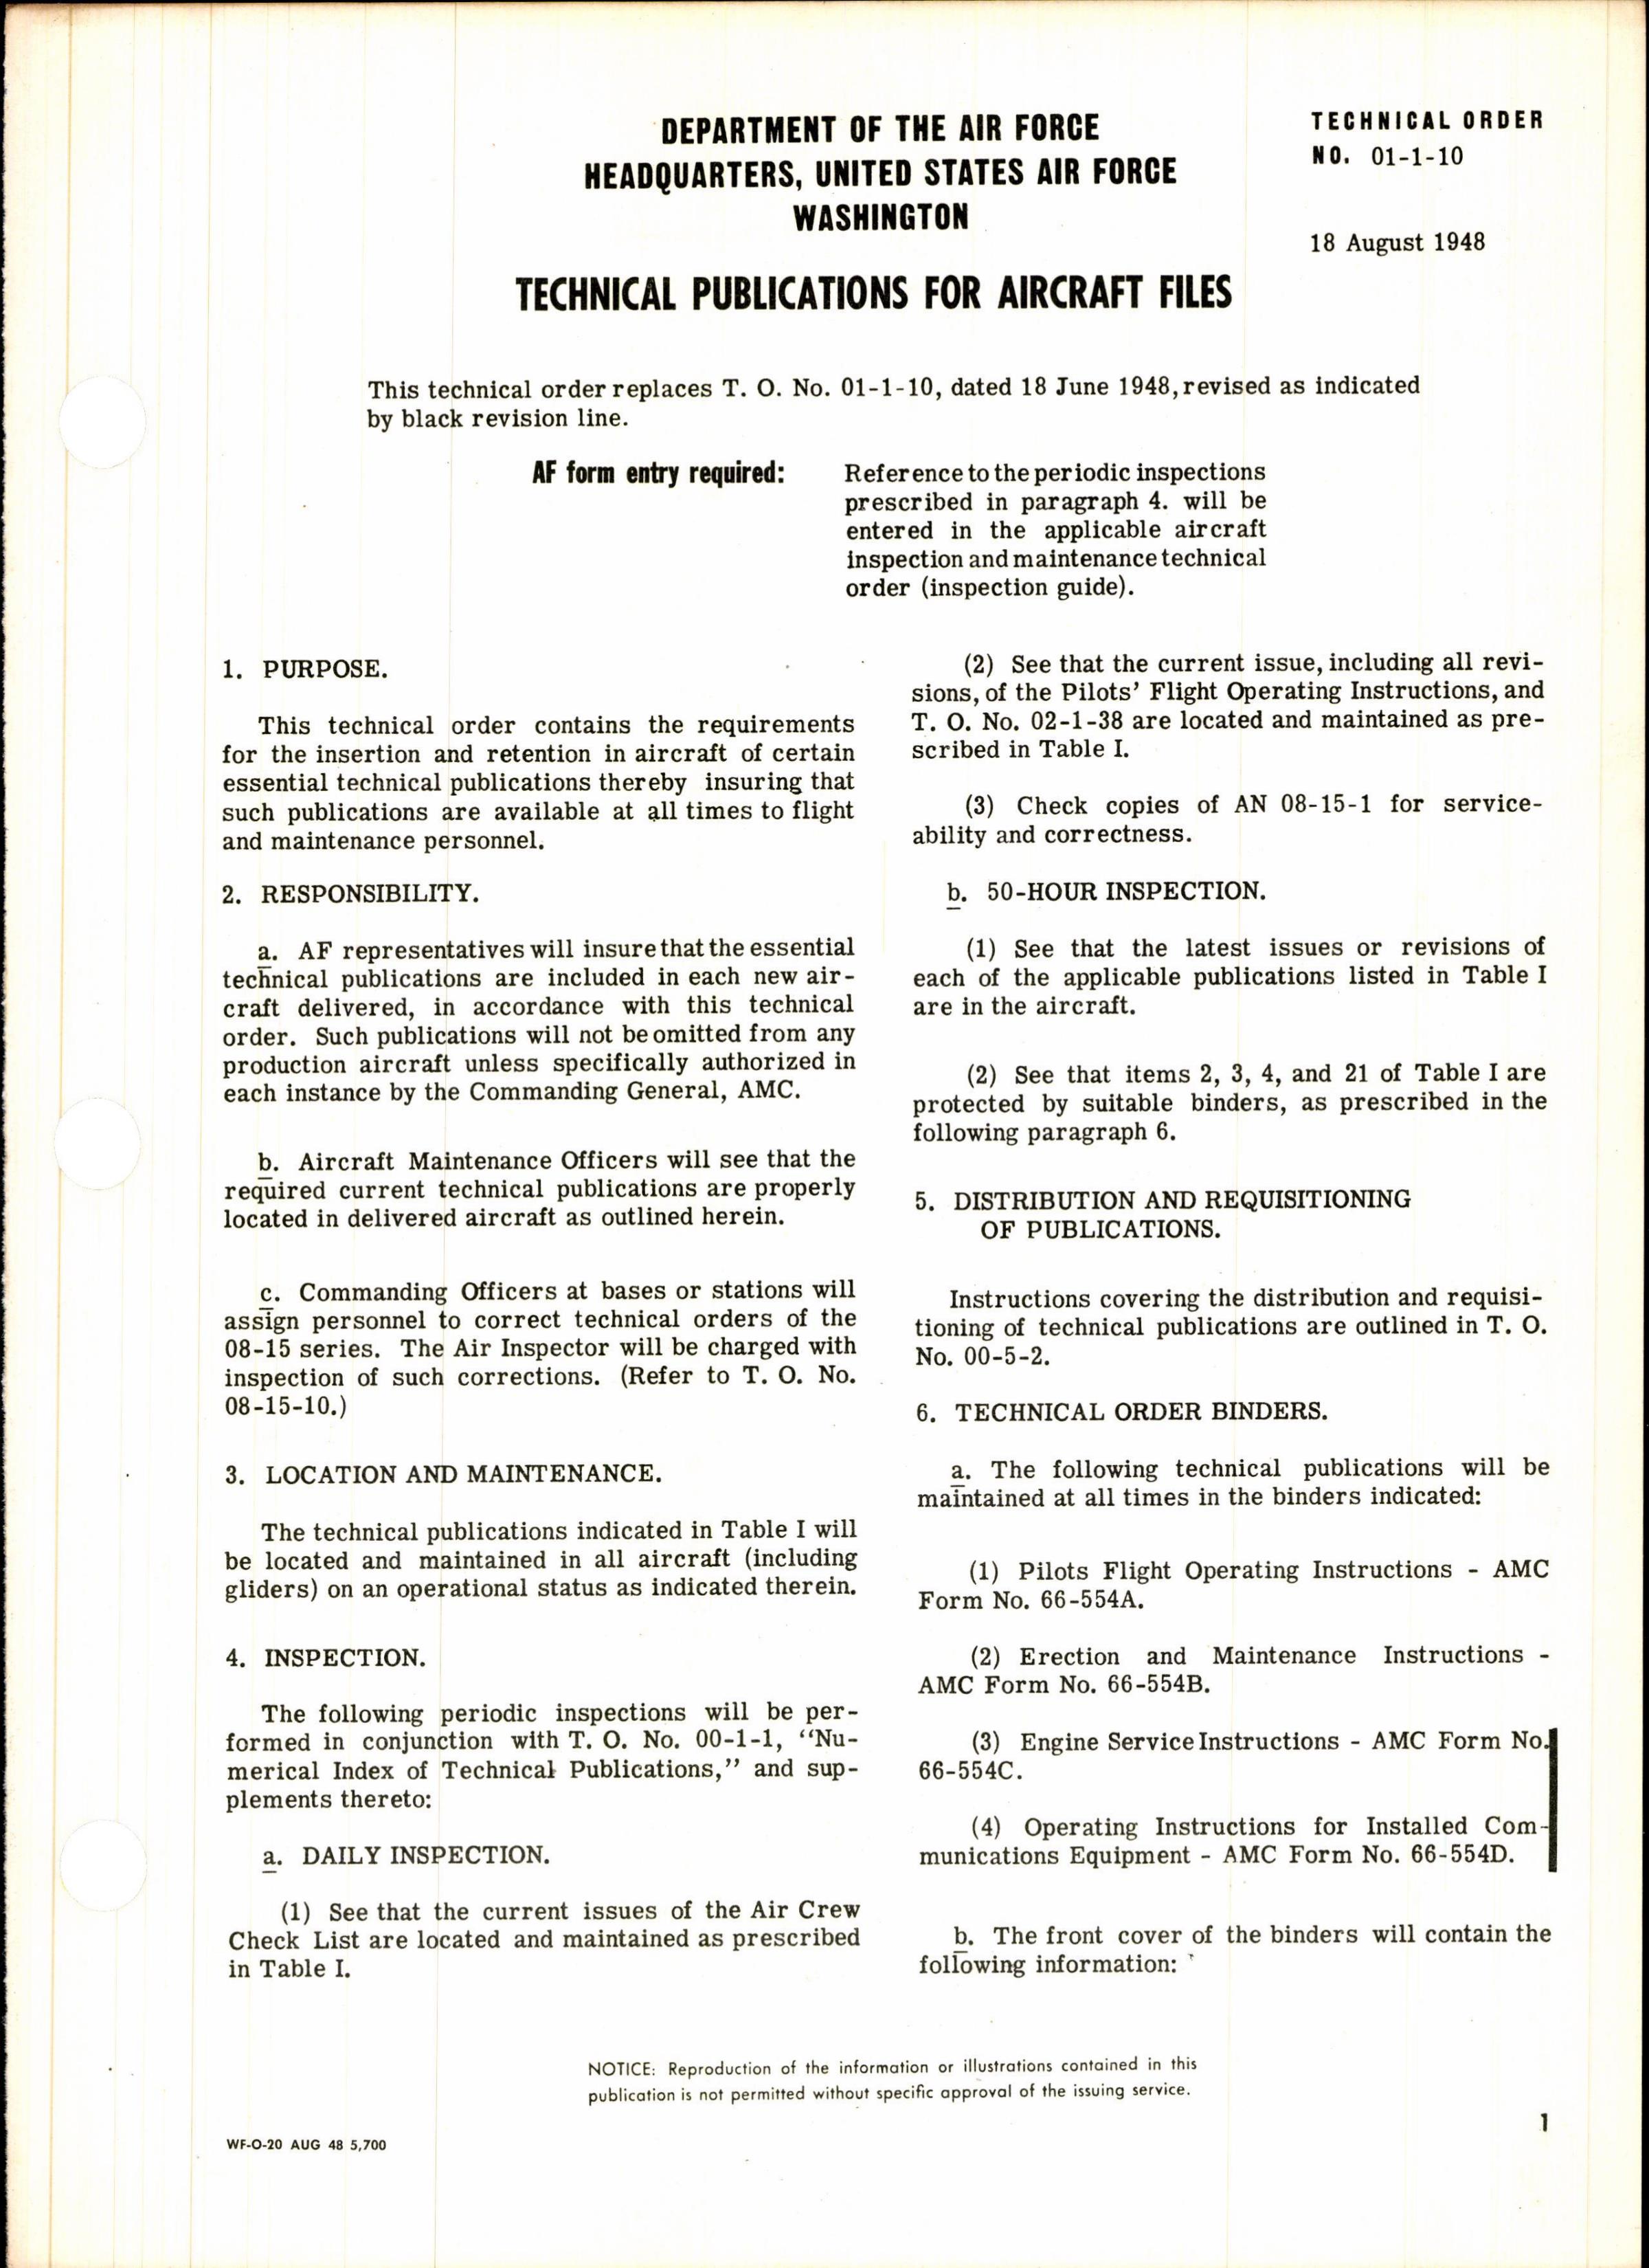 Sample page 1 from AirCorps Library document: Technical Publications for Aircraft Files